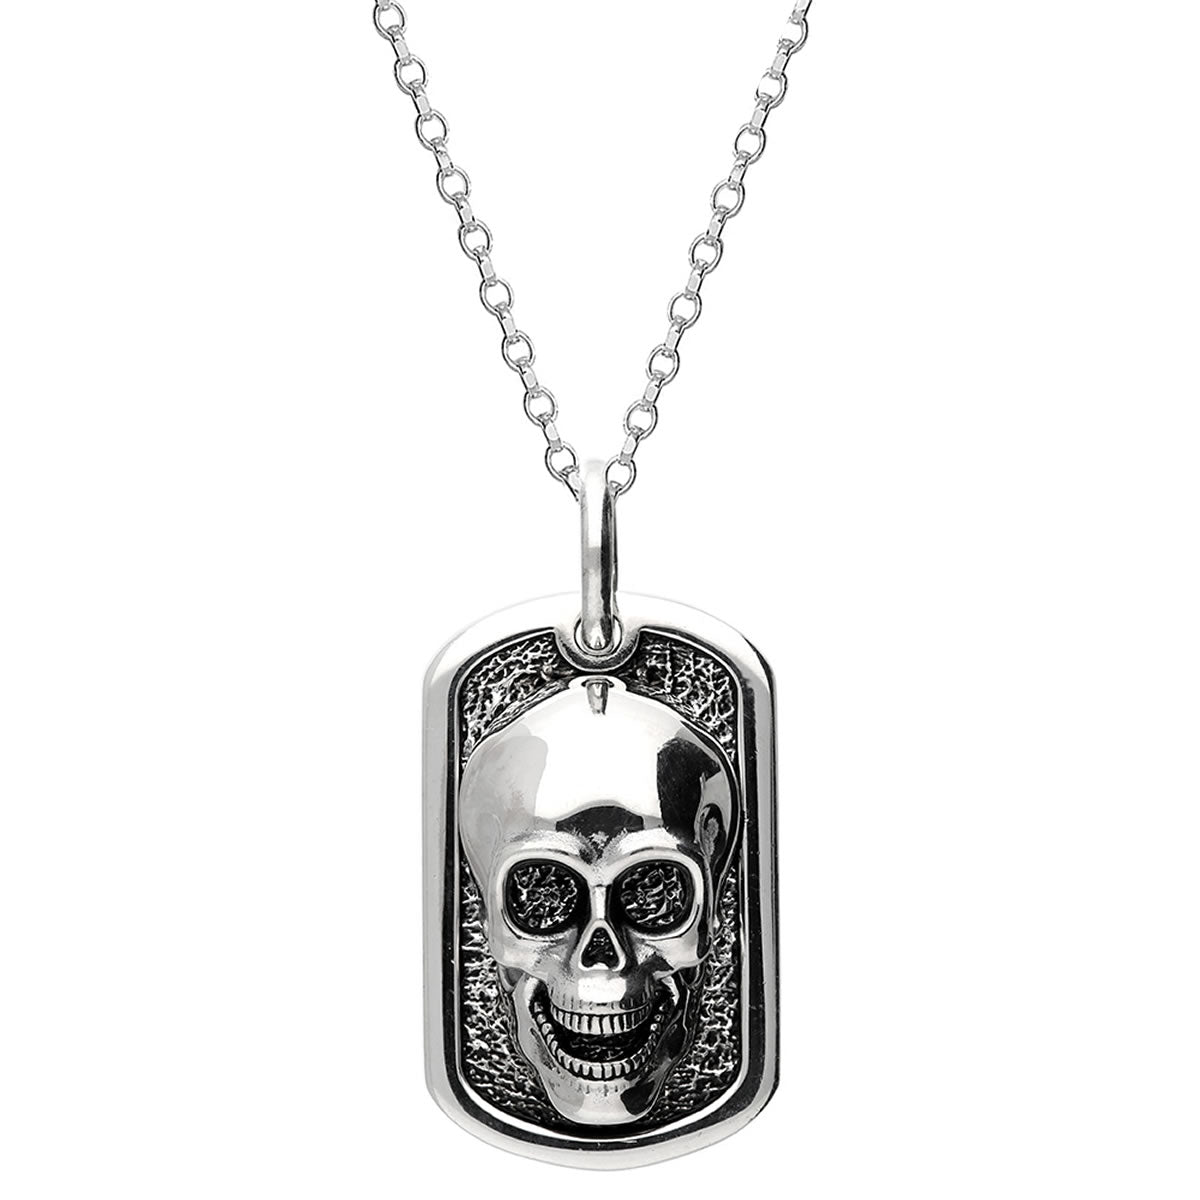 Skull Necklace | HellRide - Stainless Steel Necklace | Sanity Jewelry